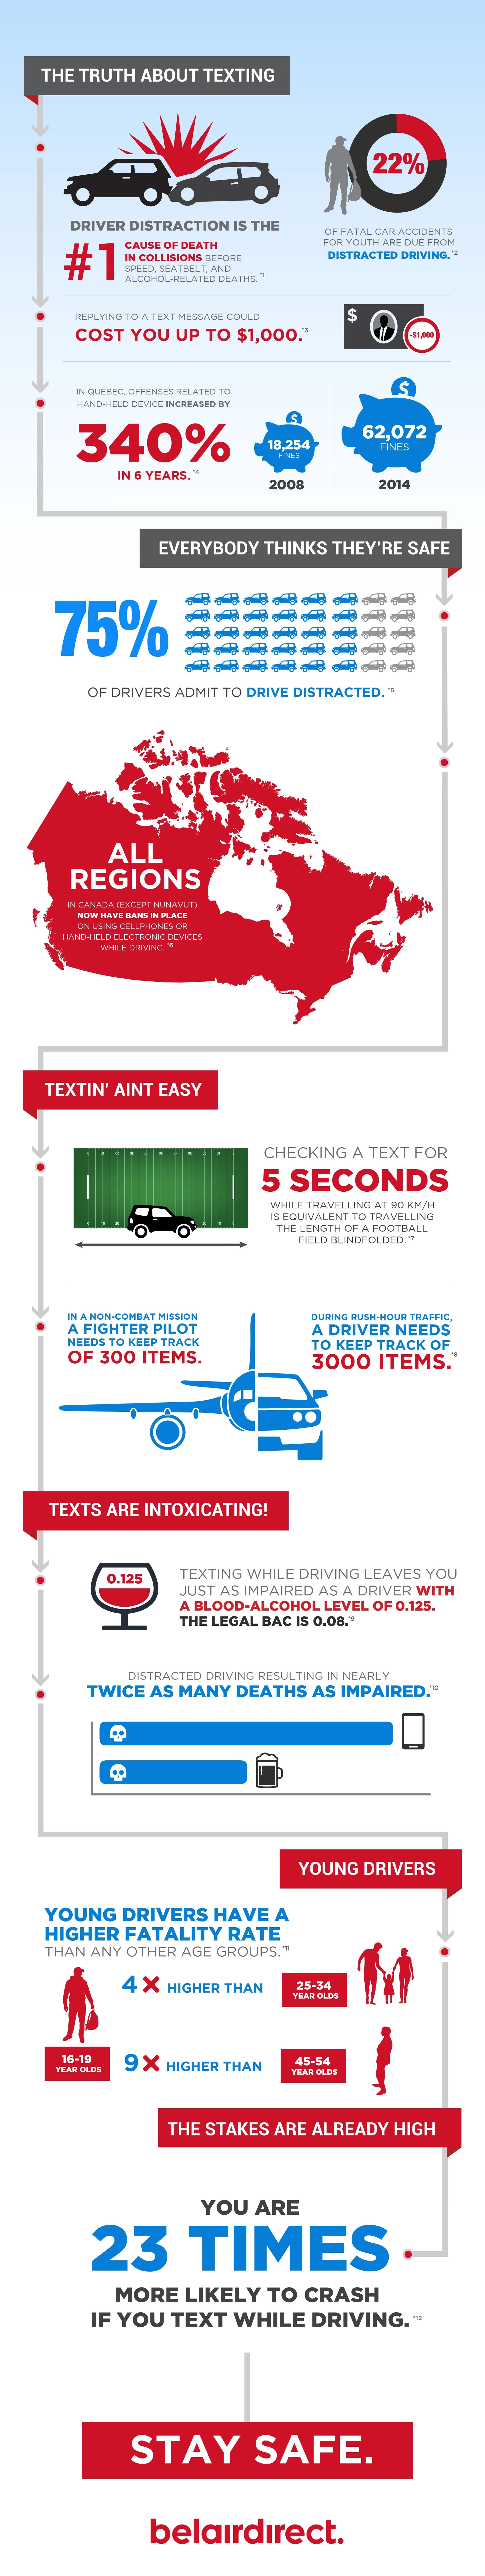 Distracted Driving Statistics, an infographic